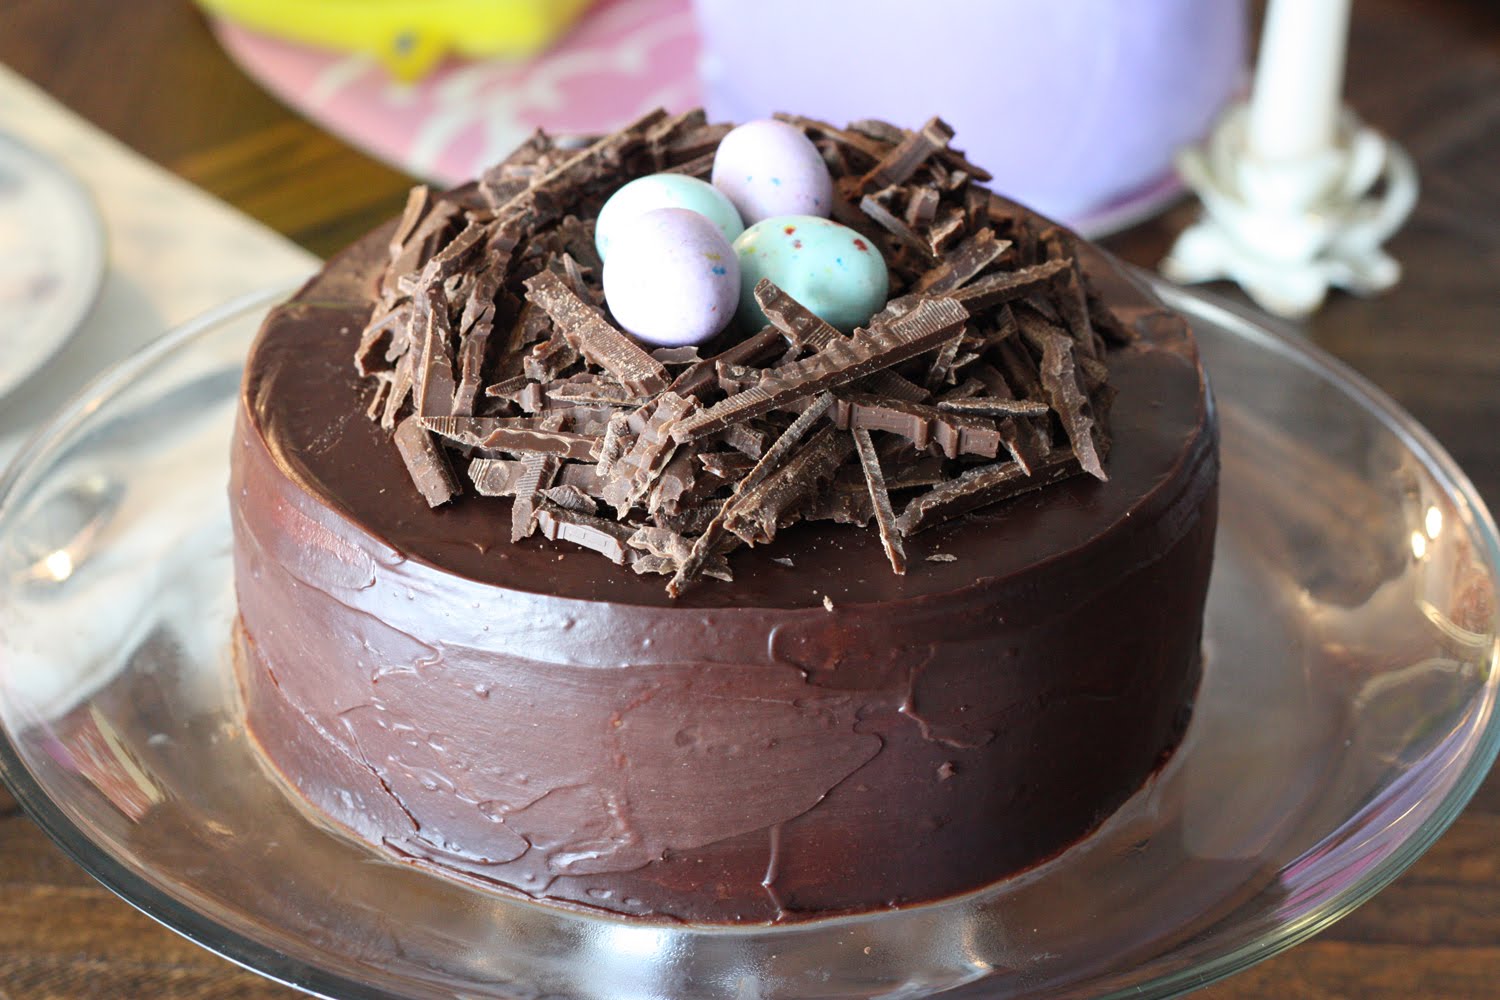 chocolate cake designs ideas That Winsome Girl . Take a simple chocolate cake, shave some chocolate 